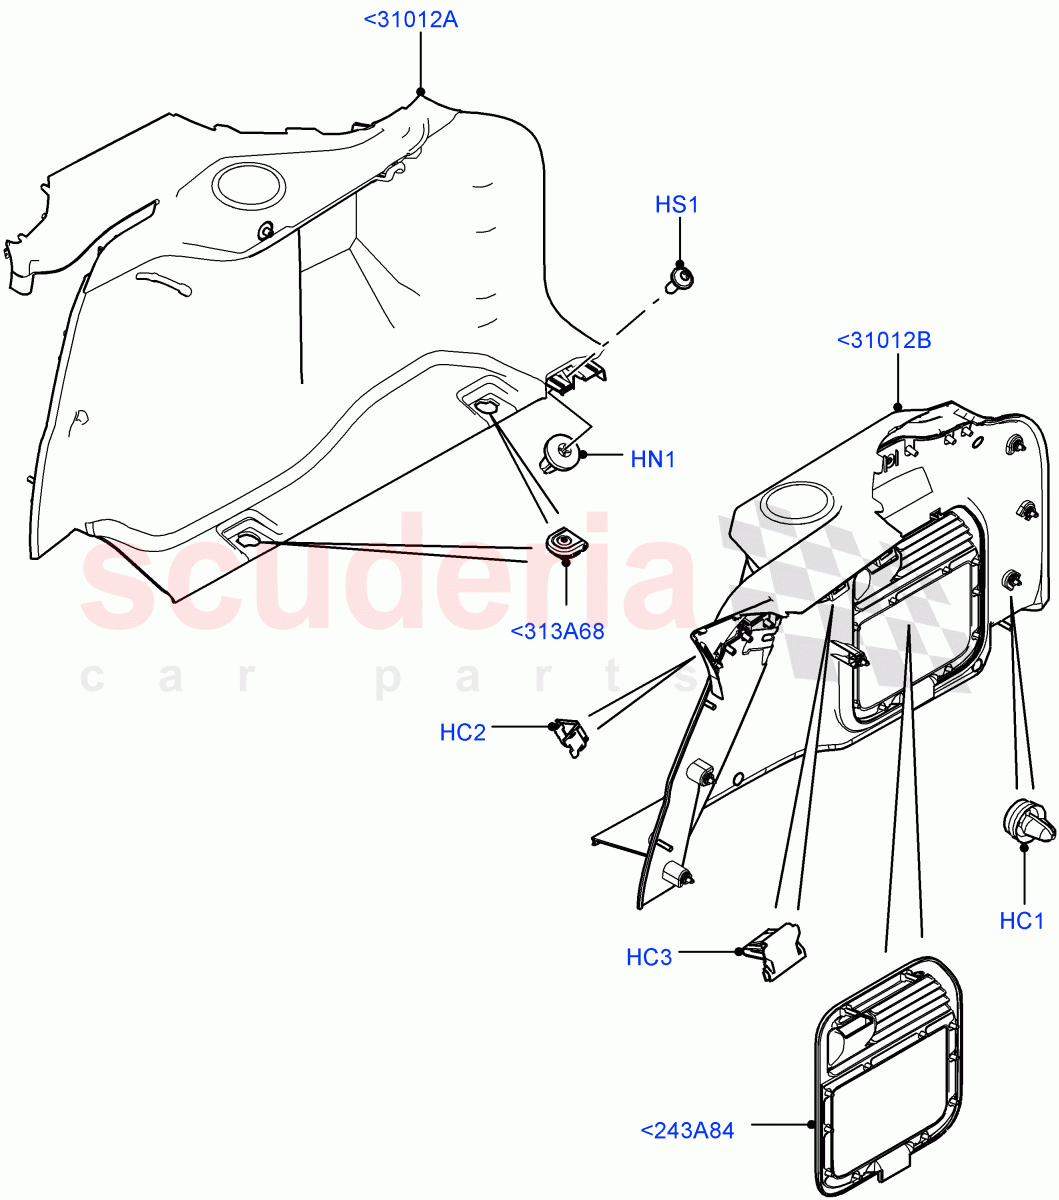 Side Trim(Luggage Compartment)(Changsu (China))((V)FROMEG000001) of Land Rover Land Rover Range Rover Evoque (2012-2018) [2.2 Single Turbo Diesel]